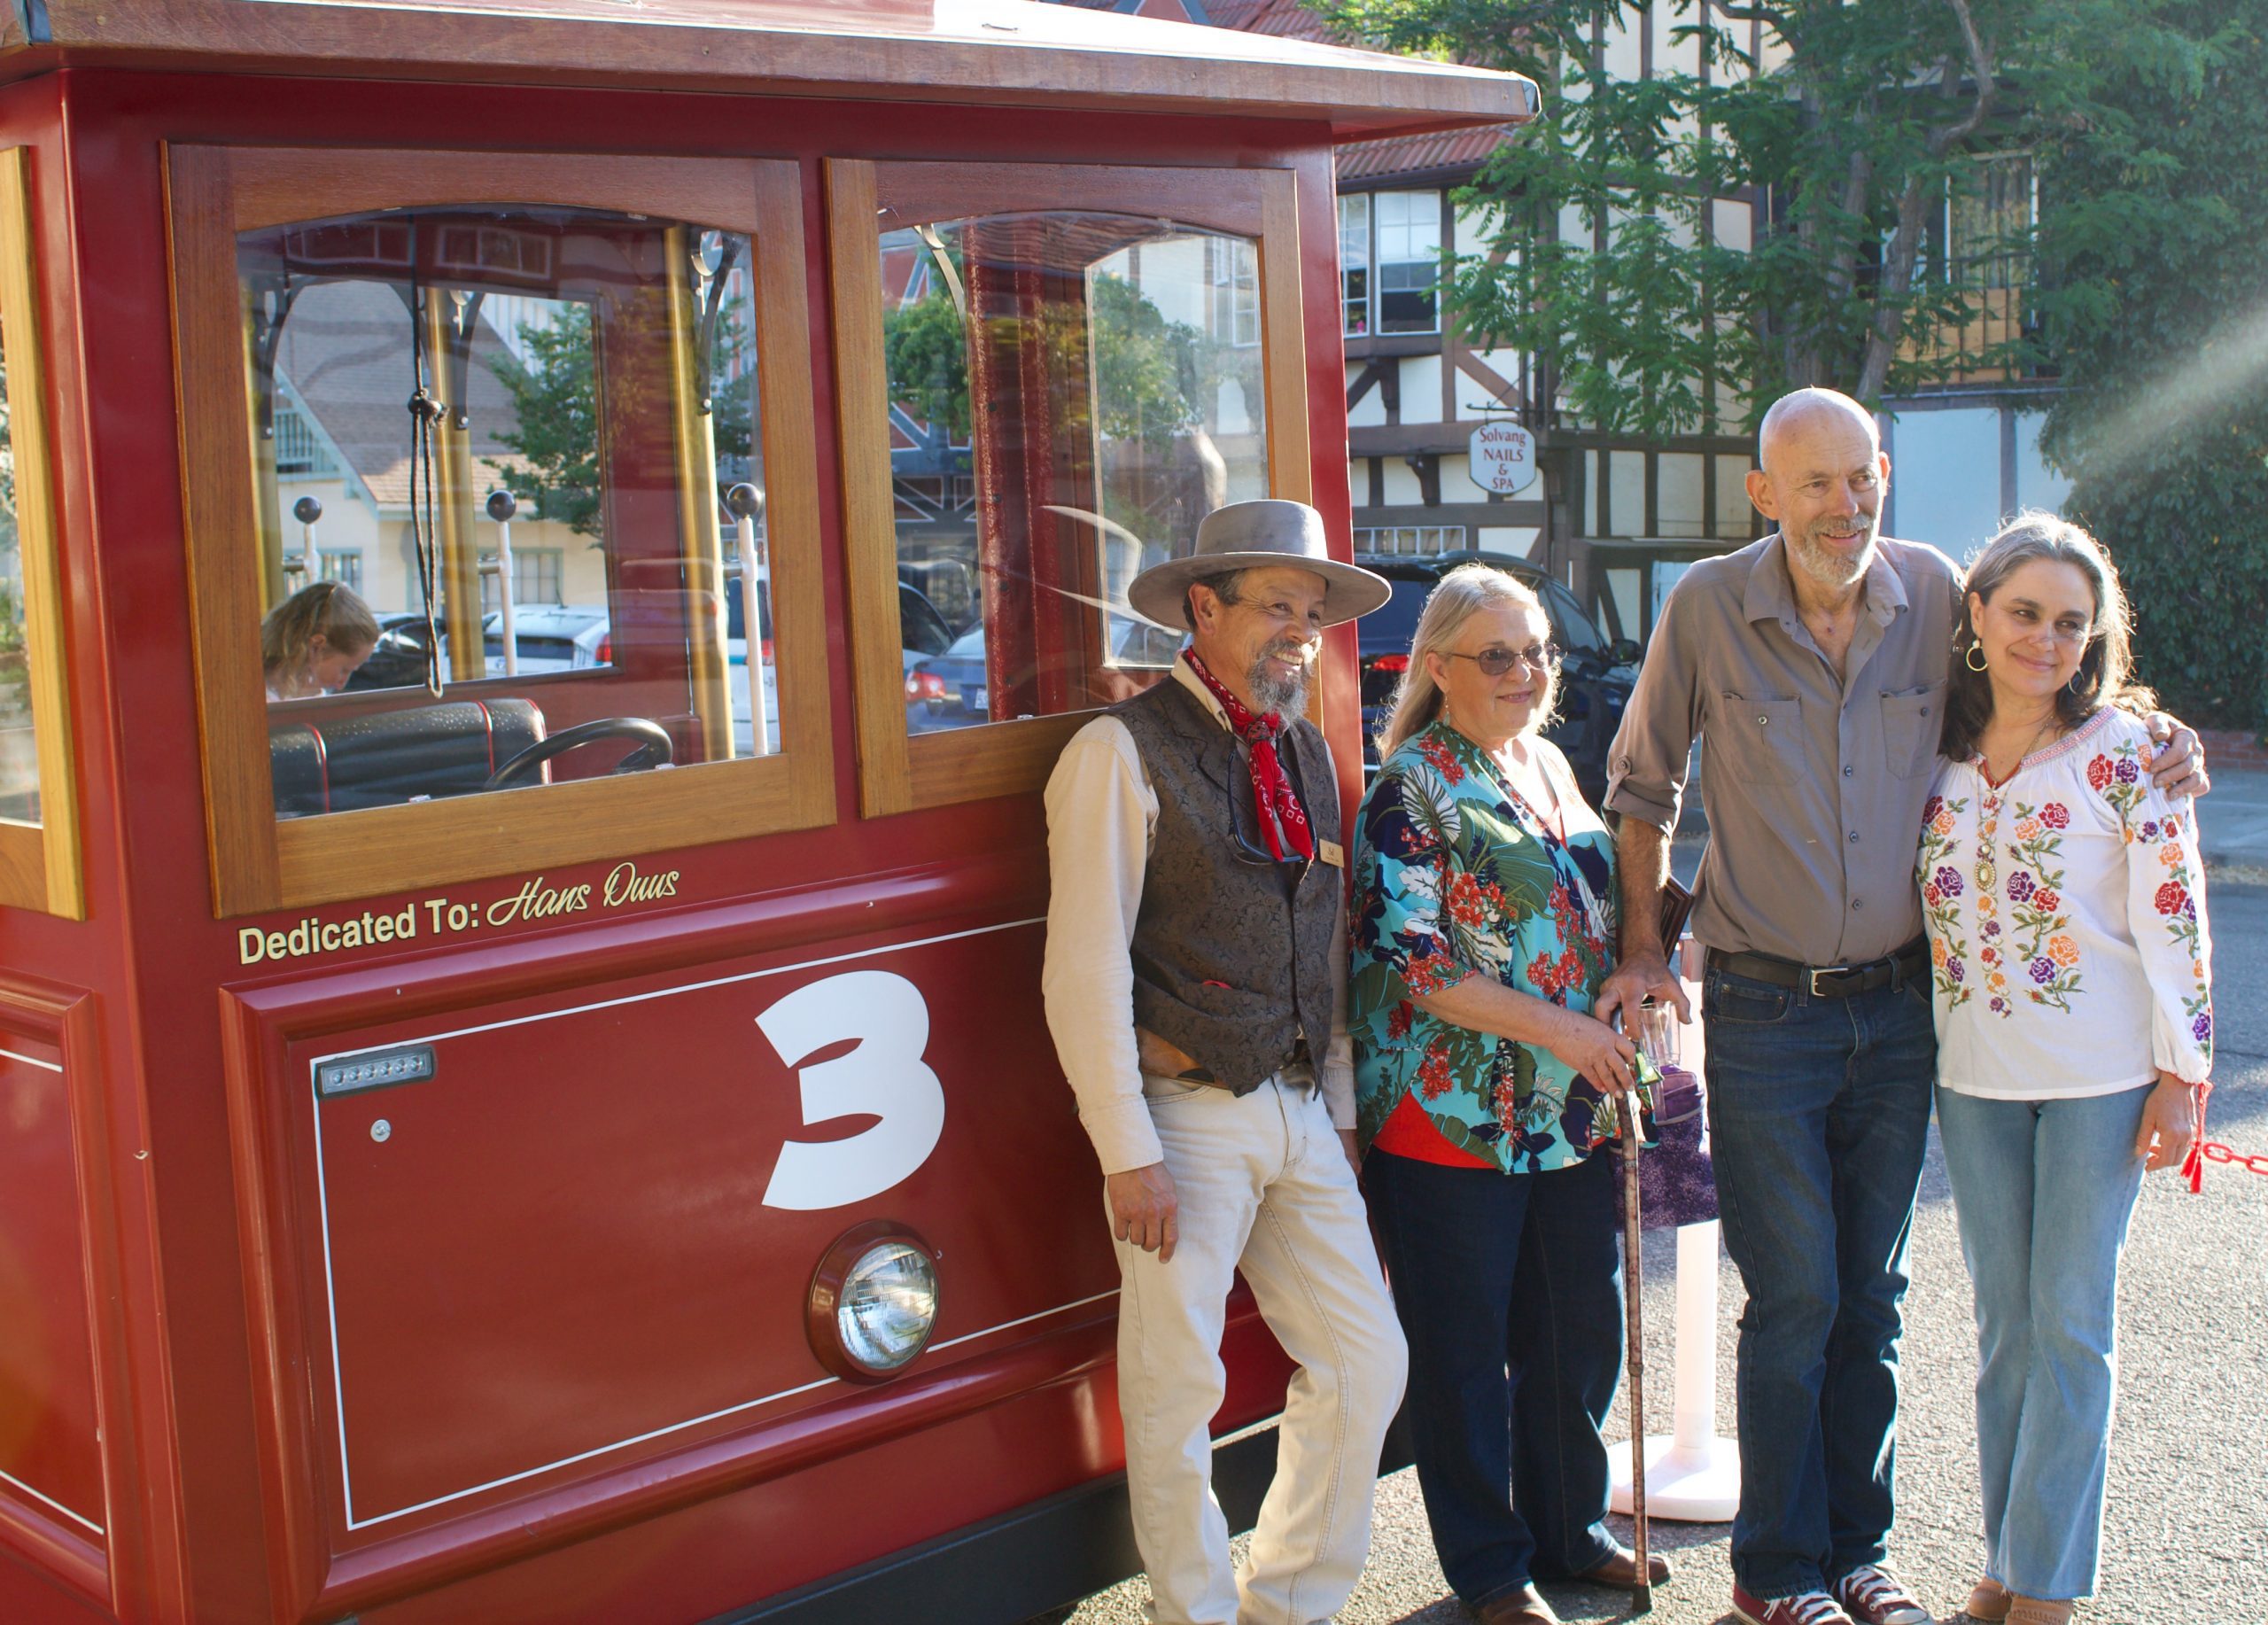 Solvang Trolley honors two locals during ribbon cutting for new vehicles